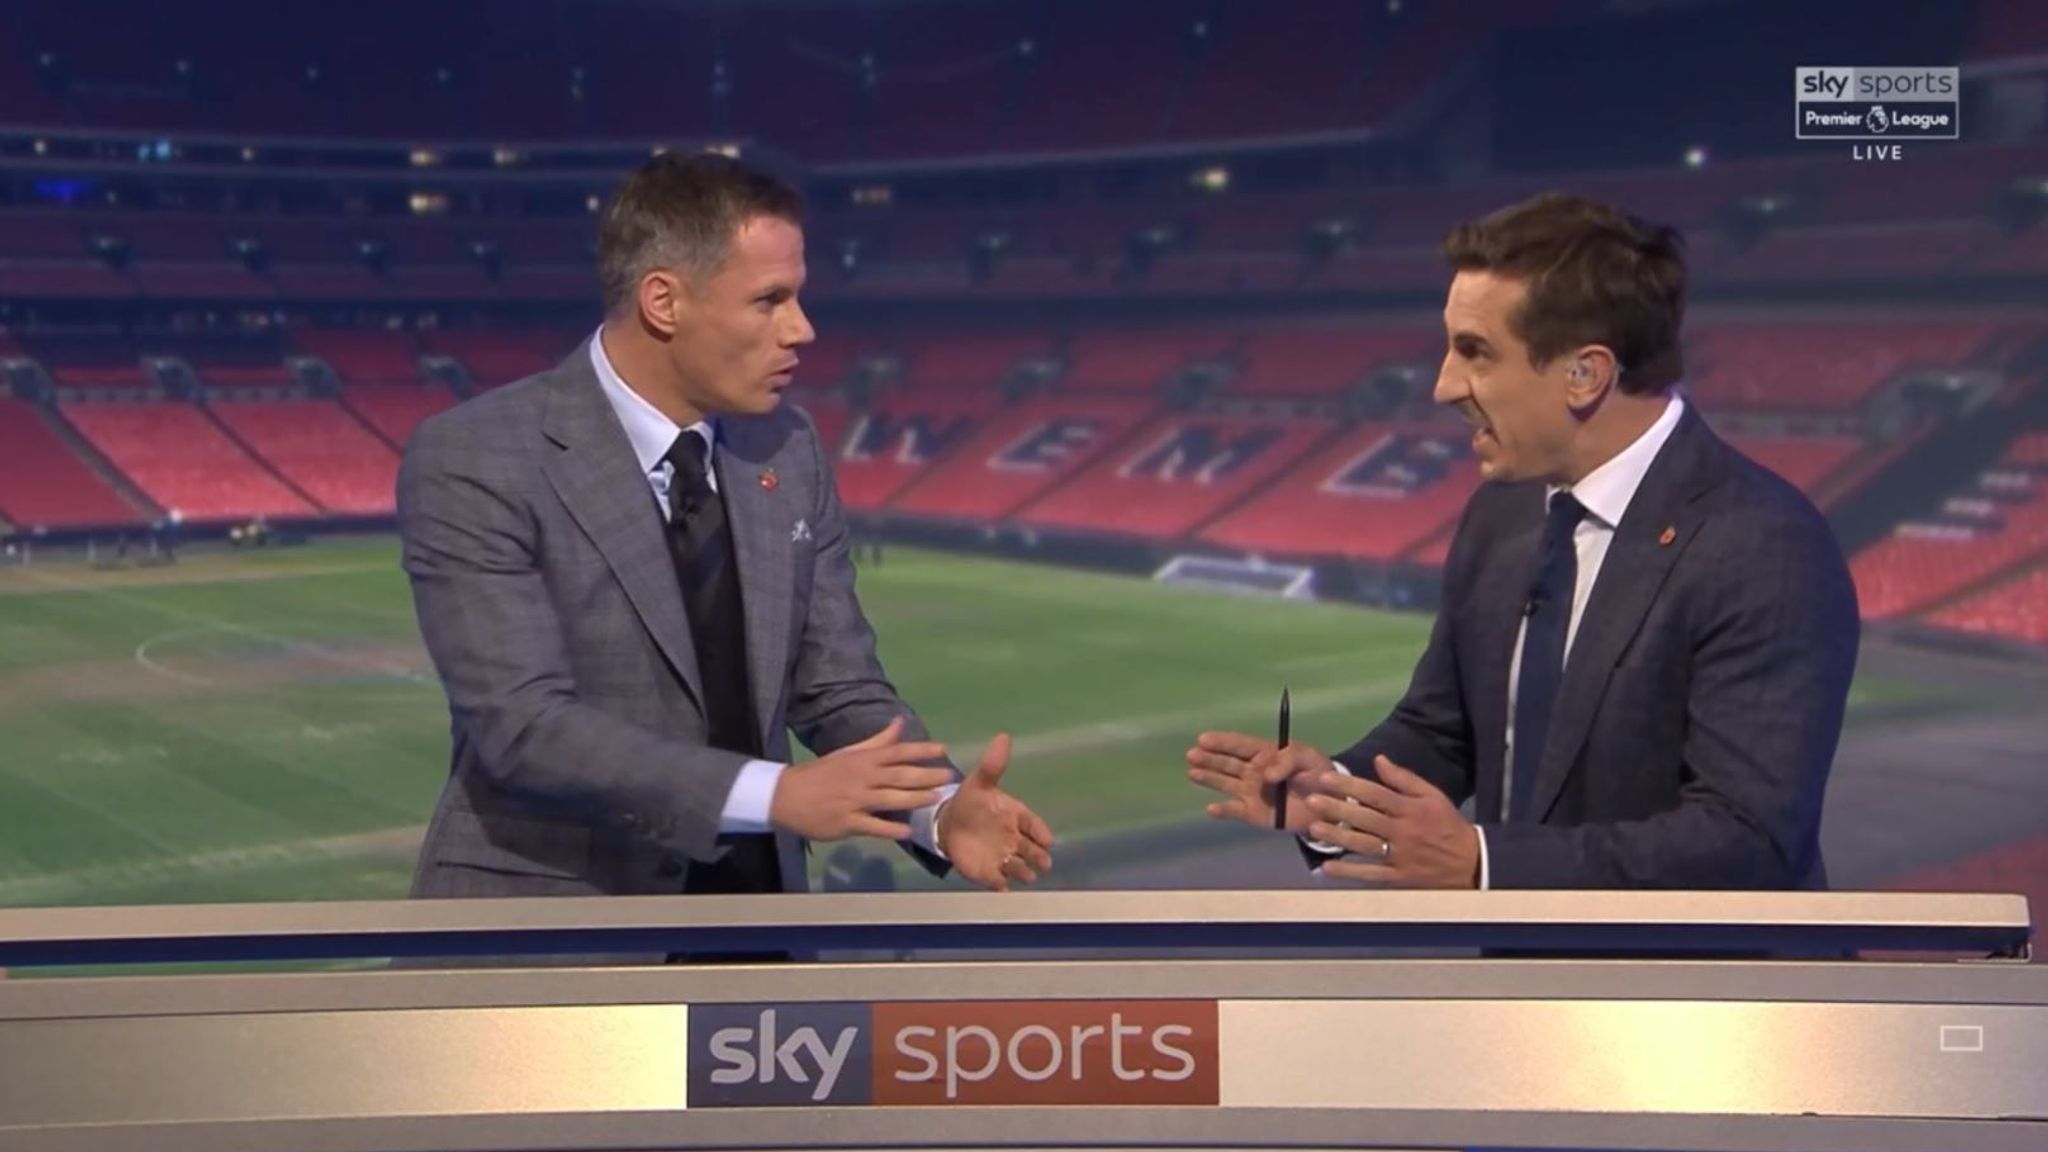 REVEALED: Sky Sports' brand new Monday Night Football studio features a  tactics 'dancefloor' where replays 'can be shown from any player's  perspective' with Jamie Carragher and Gary Neville